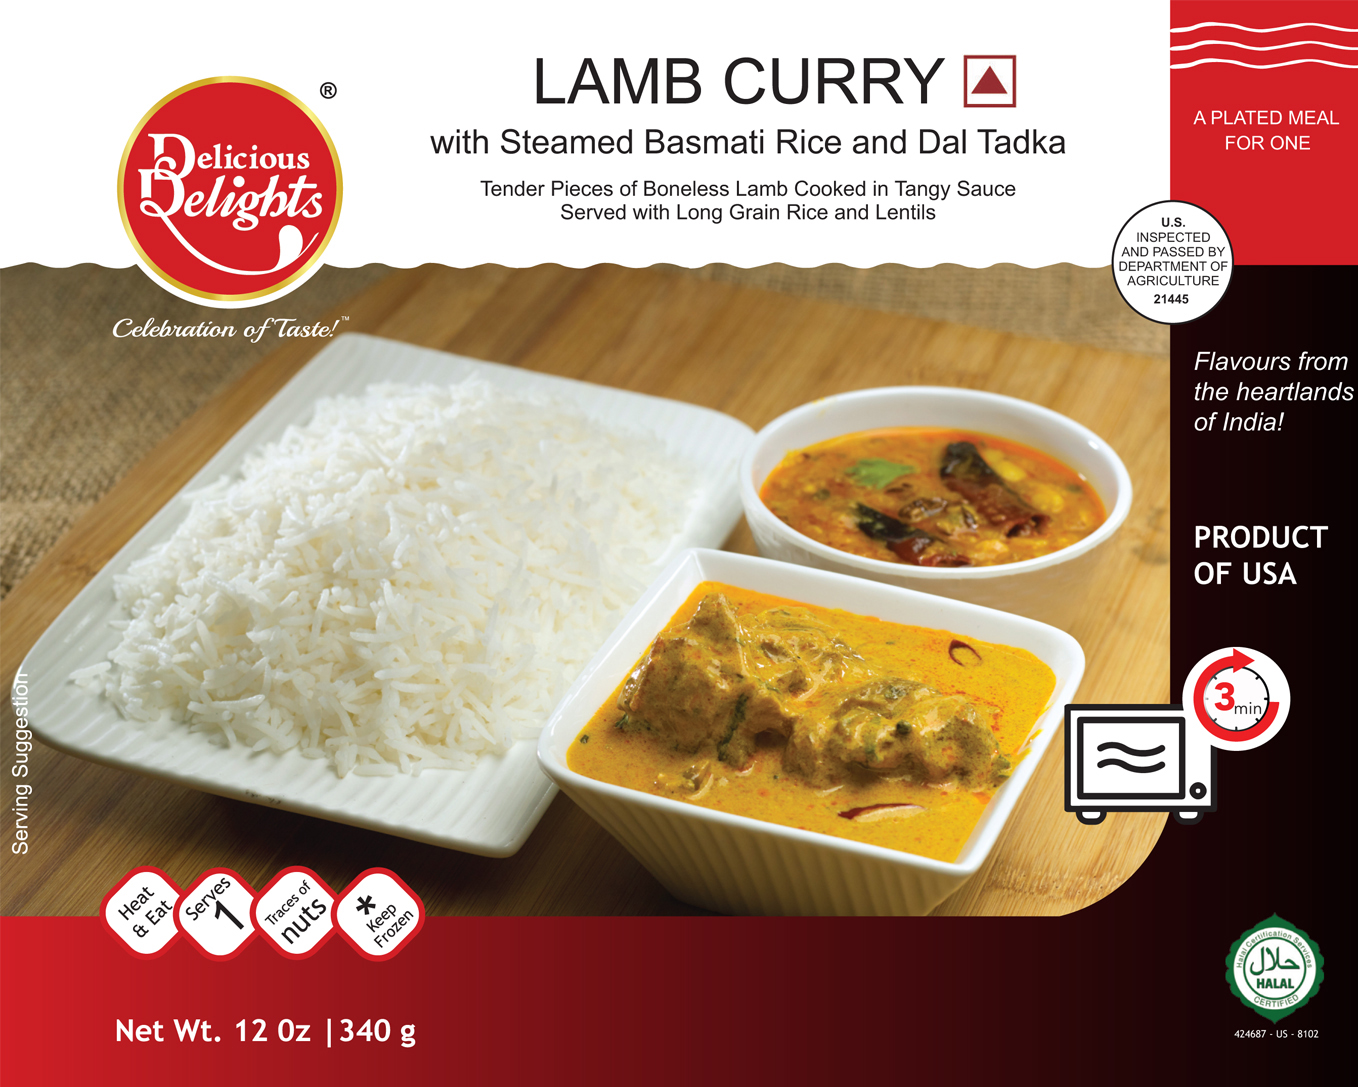 Delicious Delights Lamb Curry with Steamed Basmati Rice and Dal Tadka